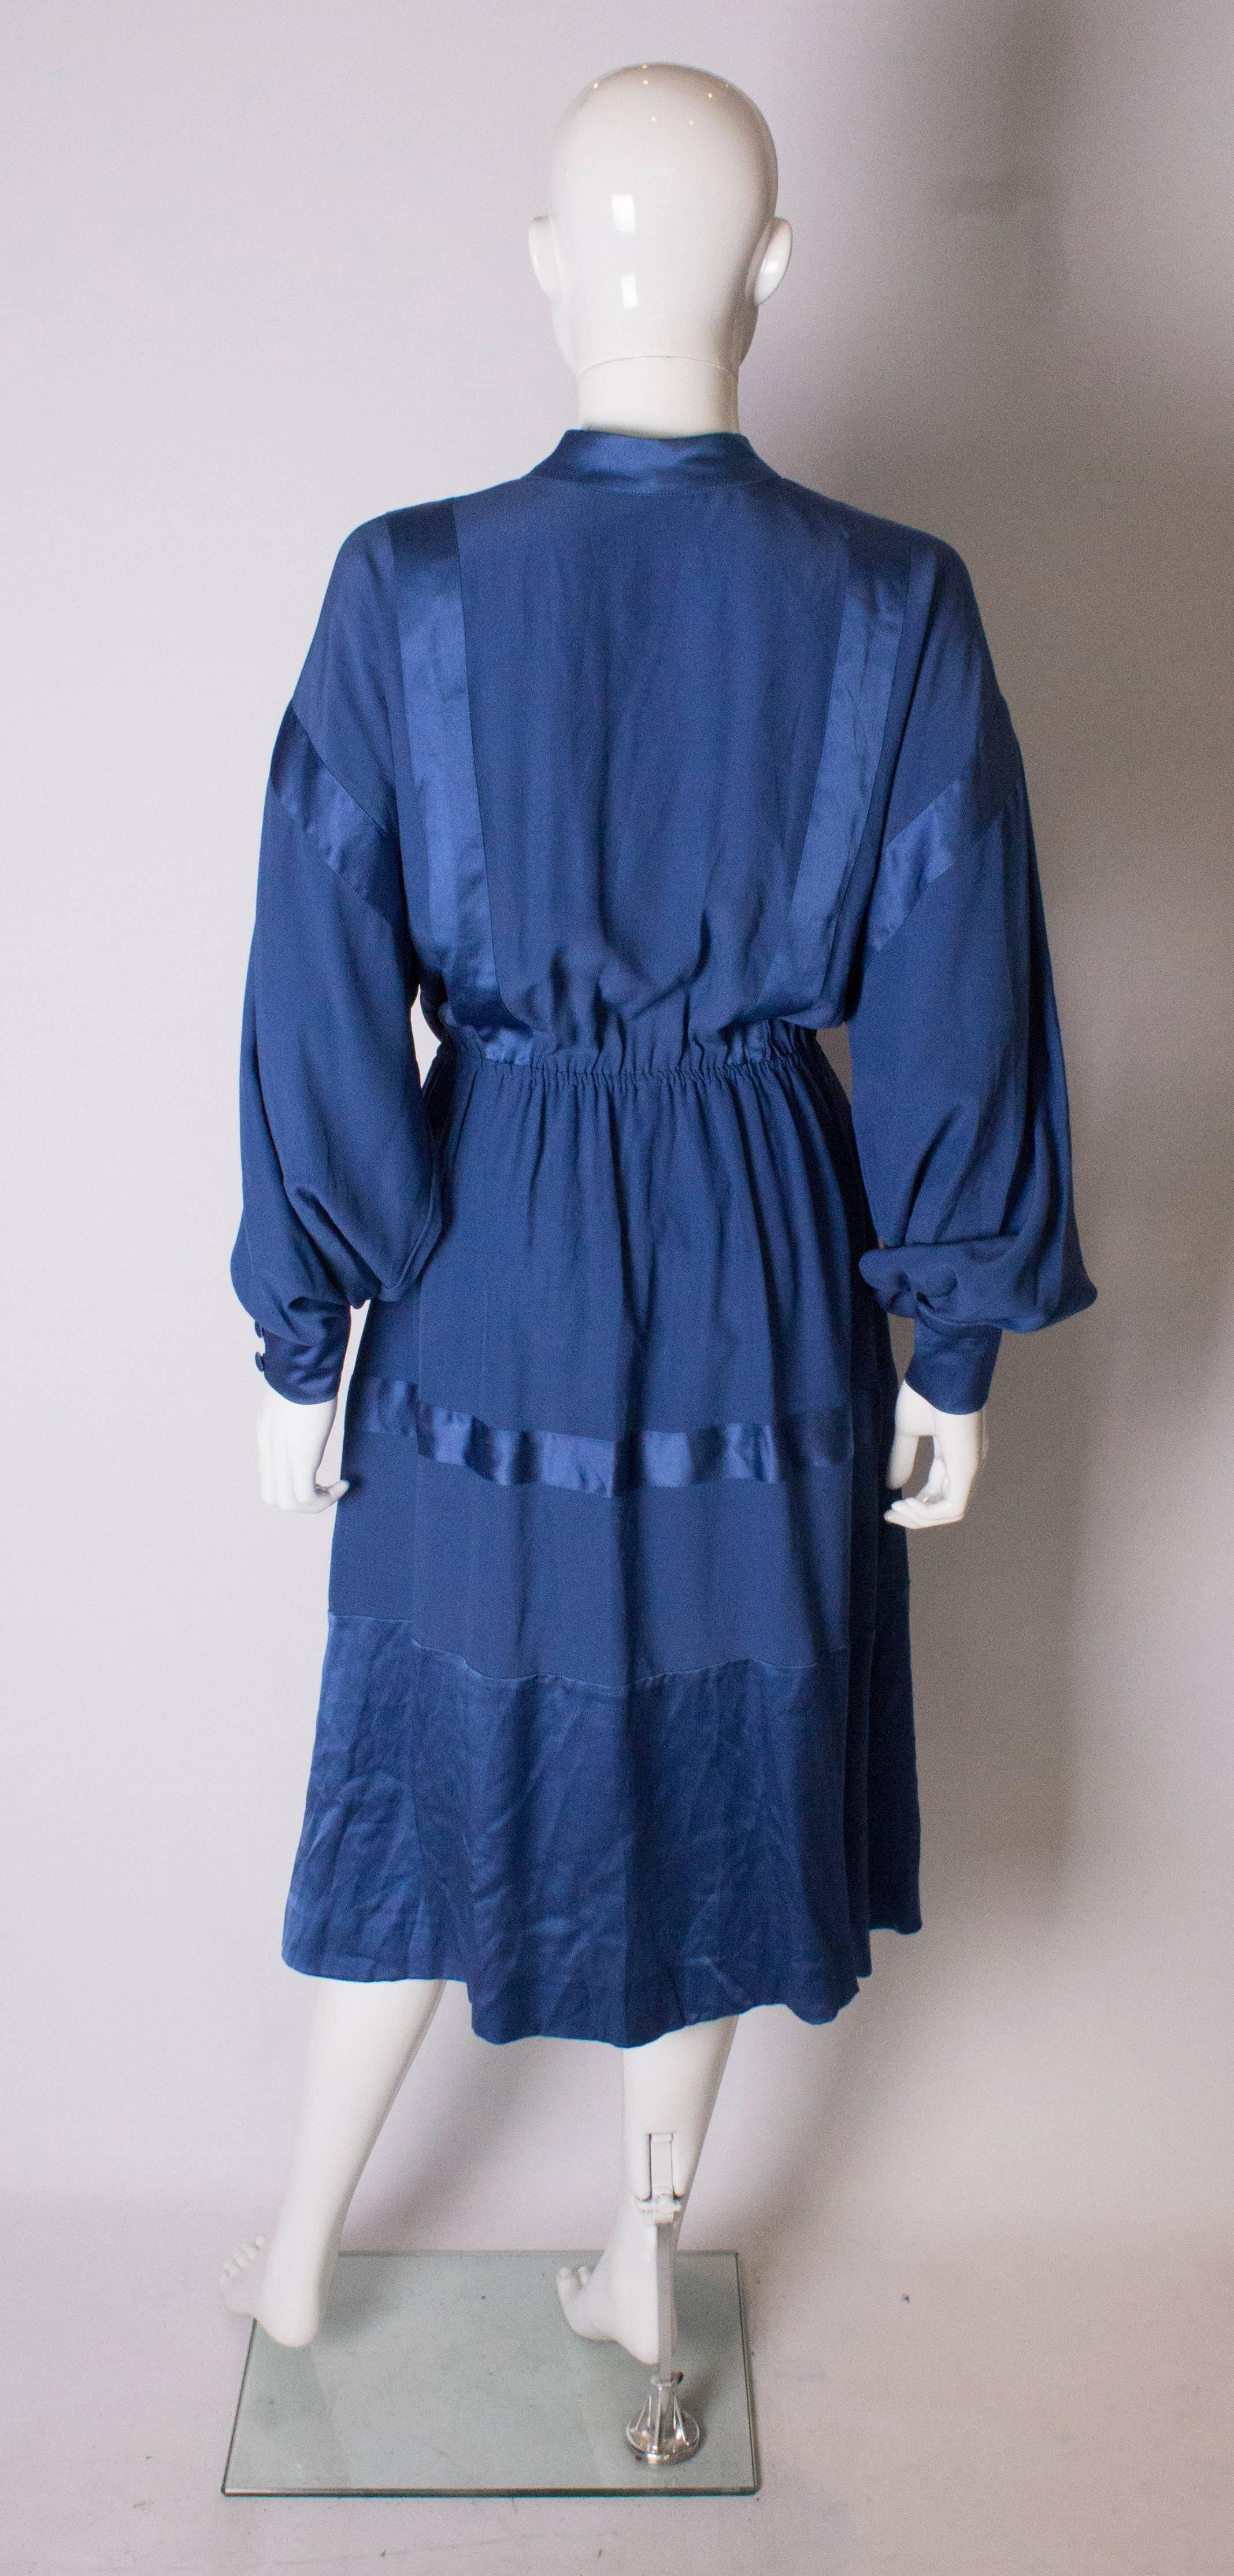 A Vintage 1970s  blue Silk Dress by Stefano Ricci for Herbie Frogg In Good Condition For Sale In London, GB